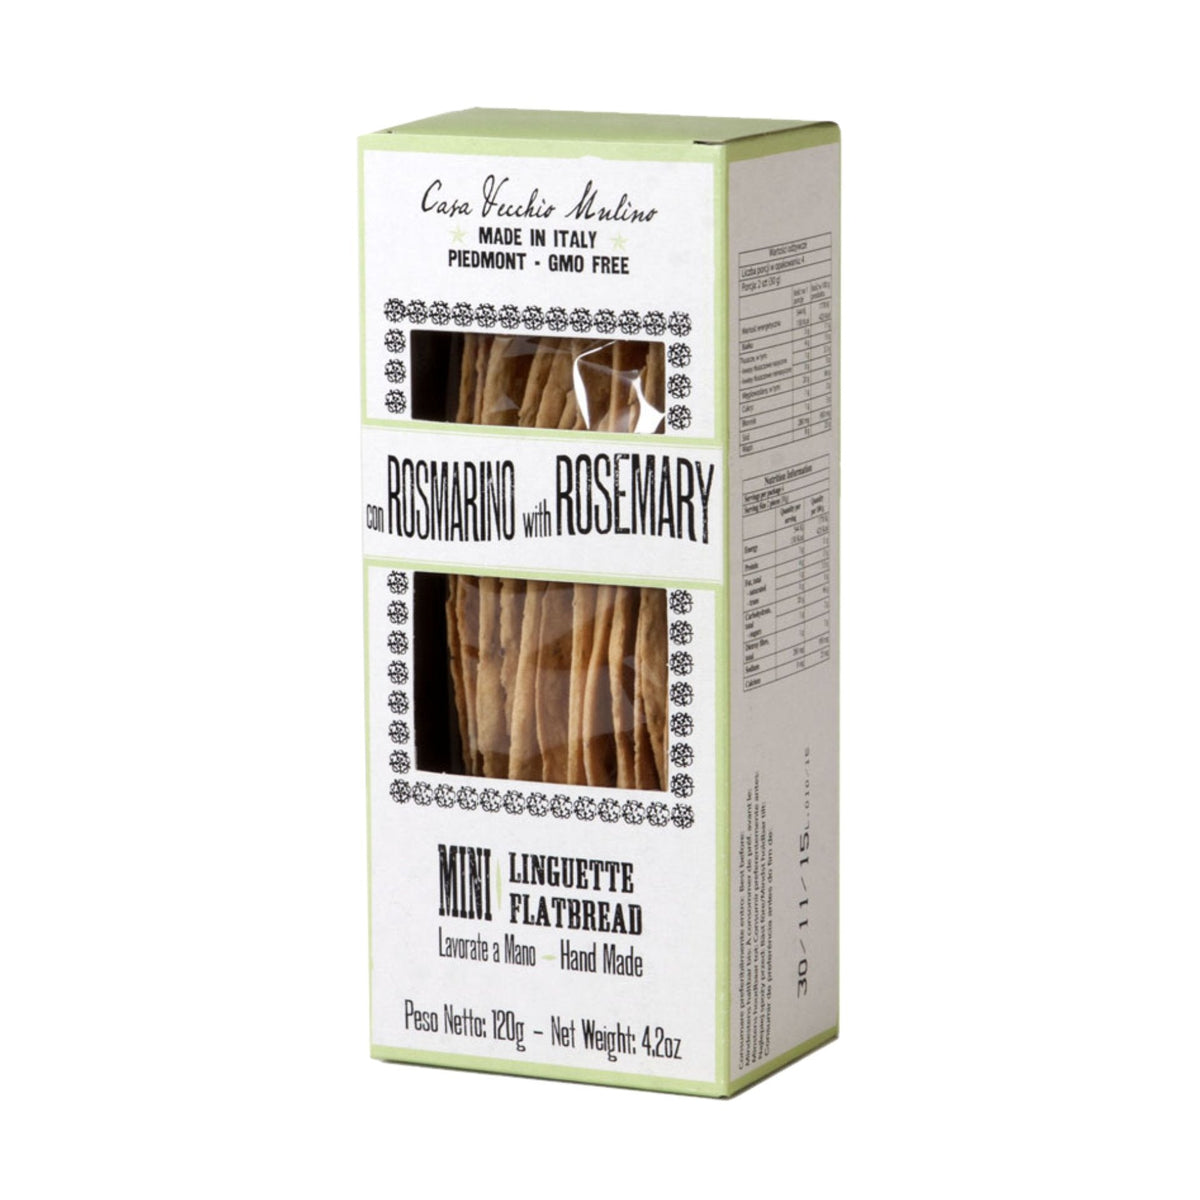 Casa Vecchio Mulino Mini Lingue with Rosemary 120g  | Imported and distributed in the UK by Just Gourmet Foods